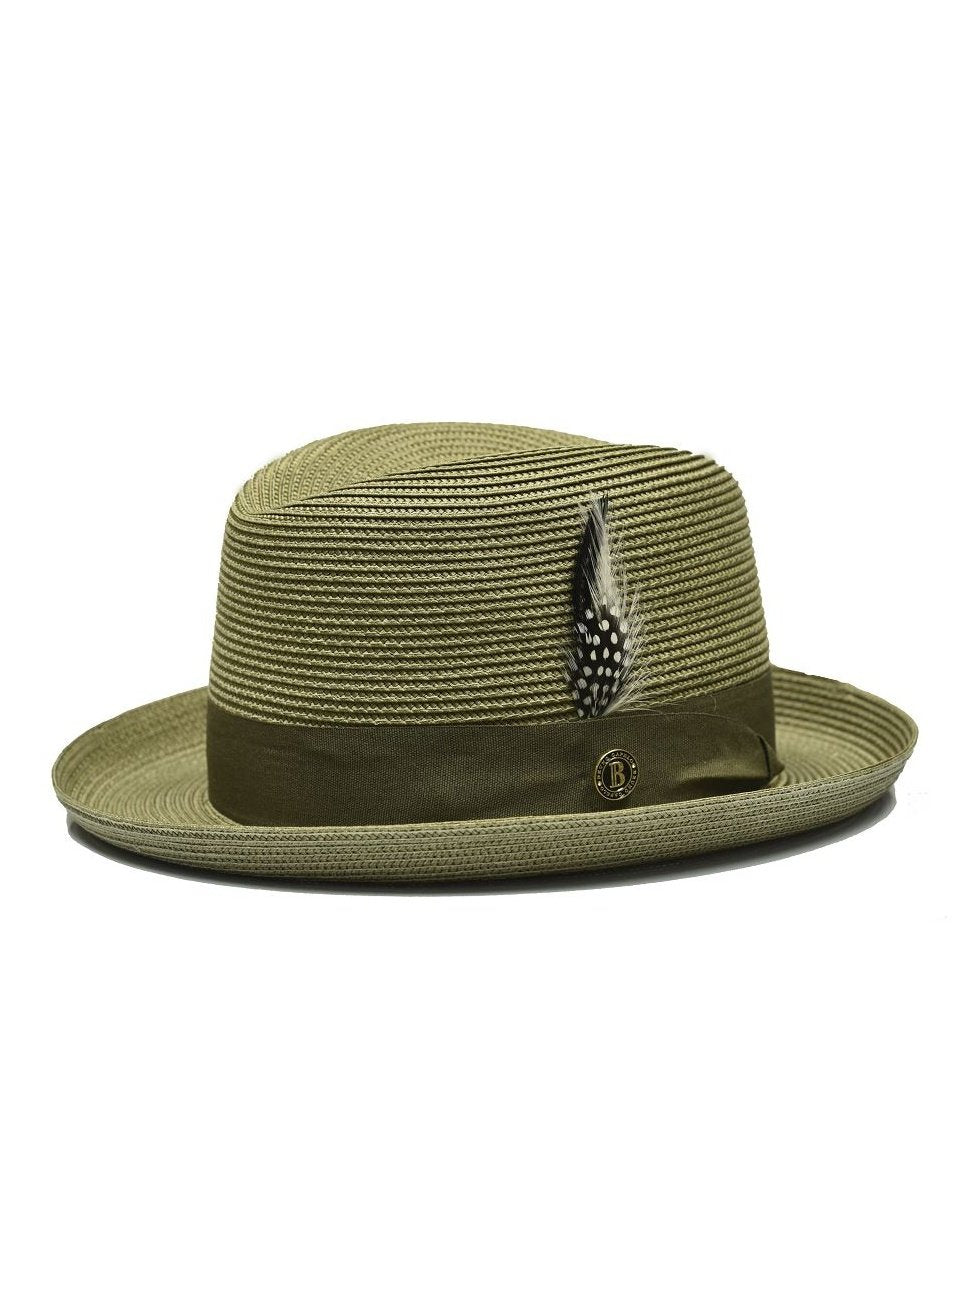 Mens The Godfather Olive Green Straw Hat